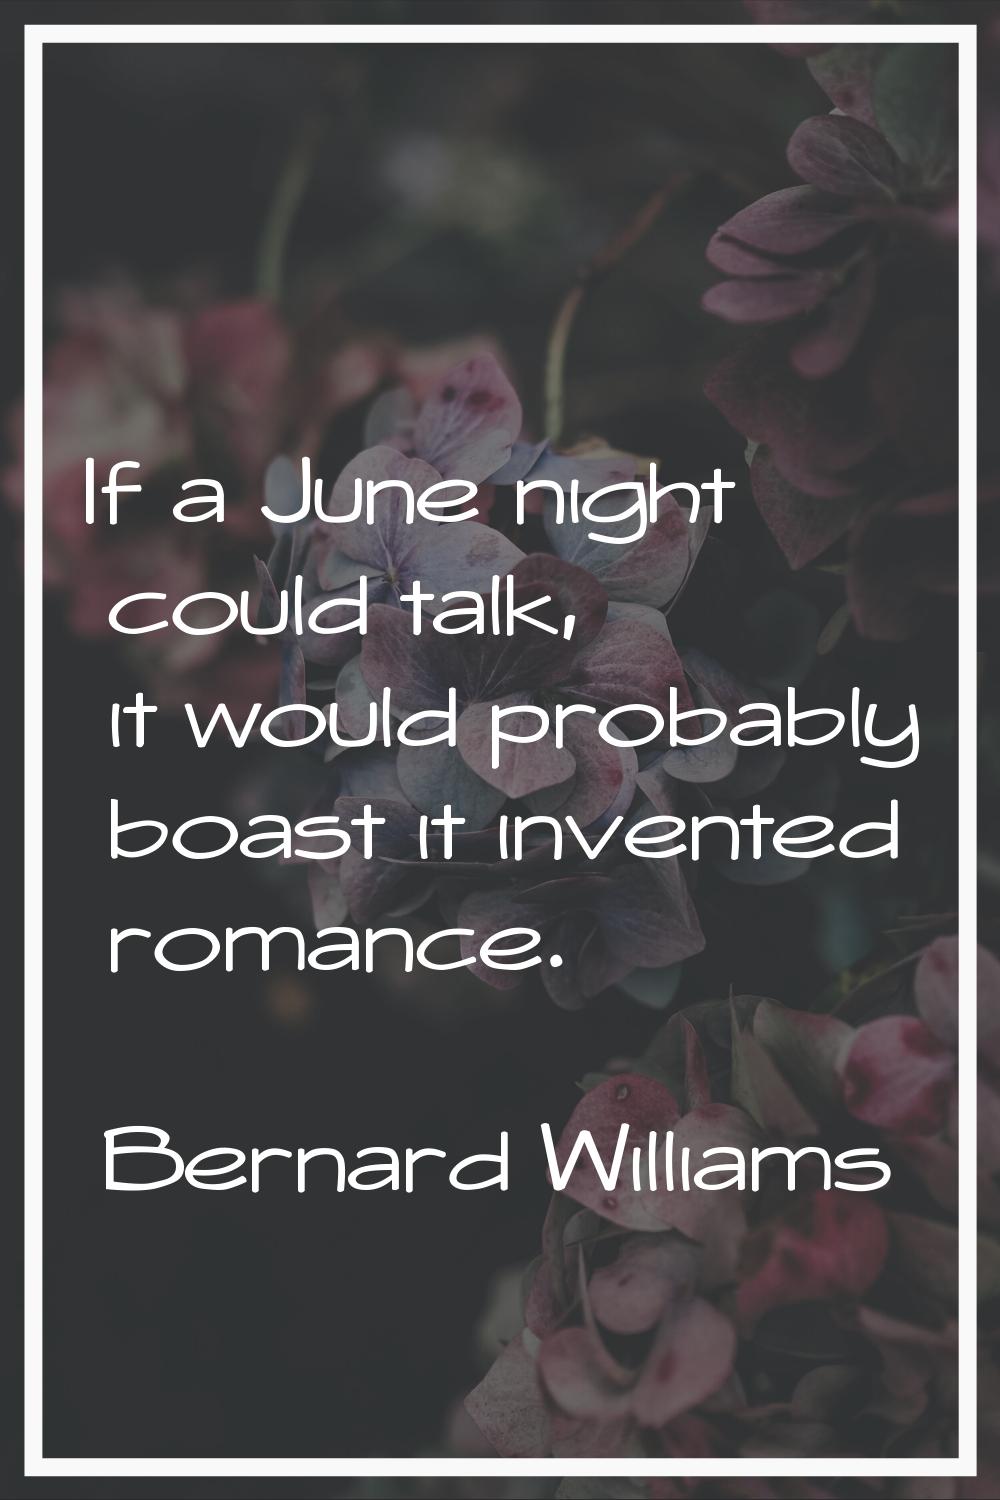 If a June night could talk, it would probably boast it invented romance.